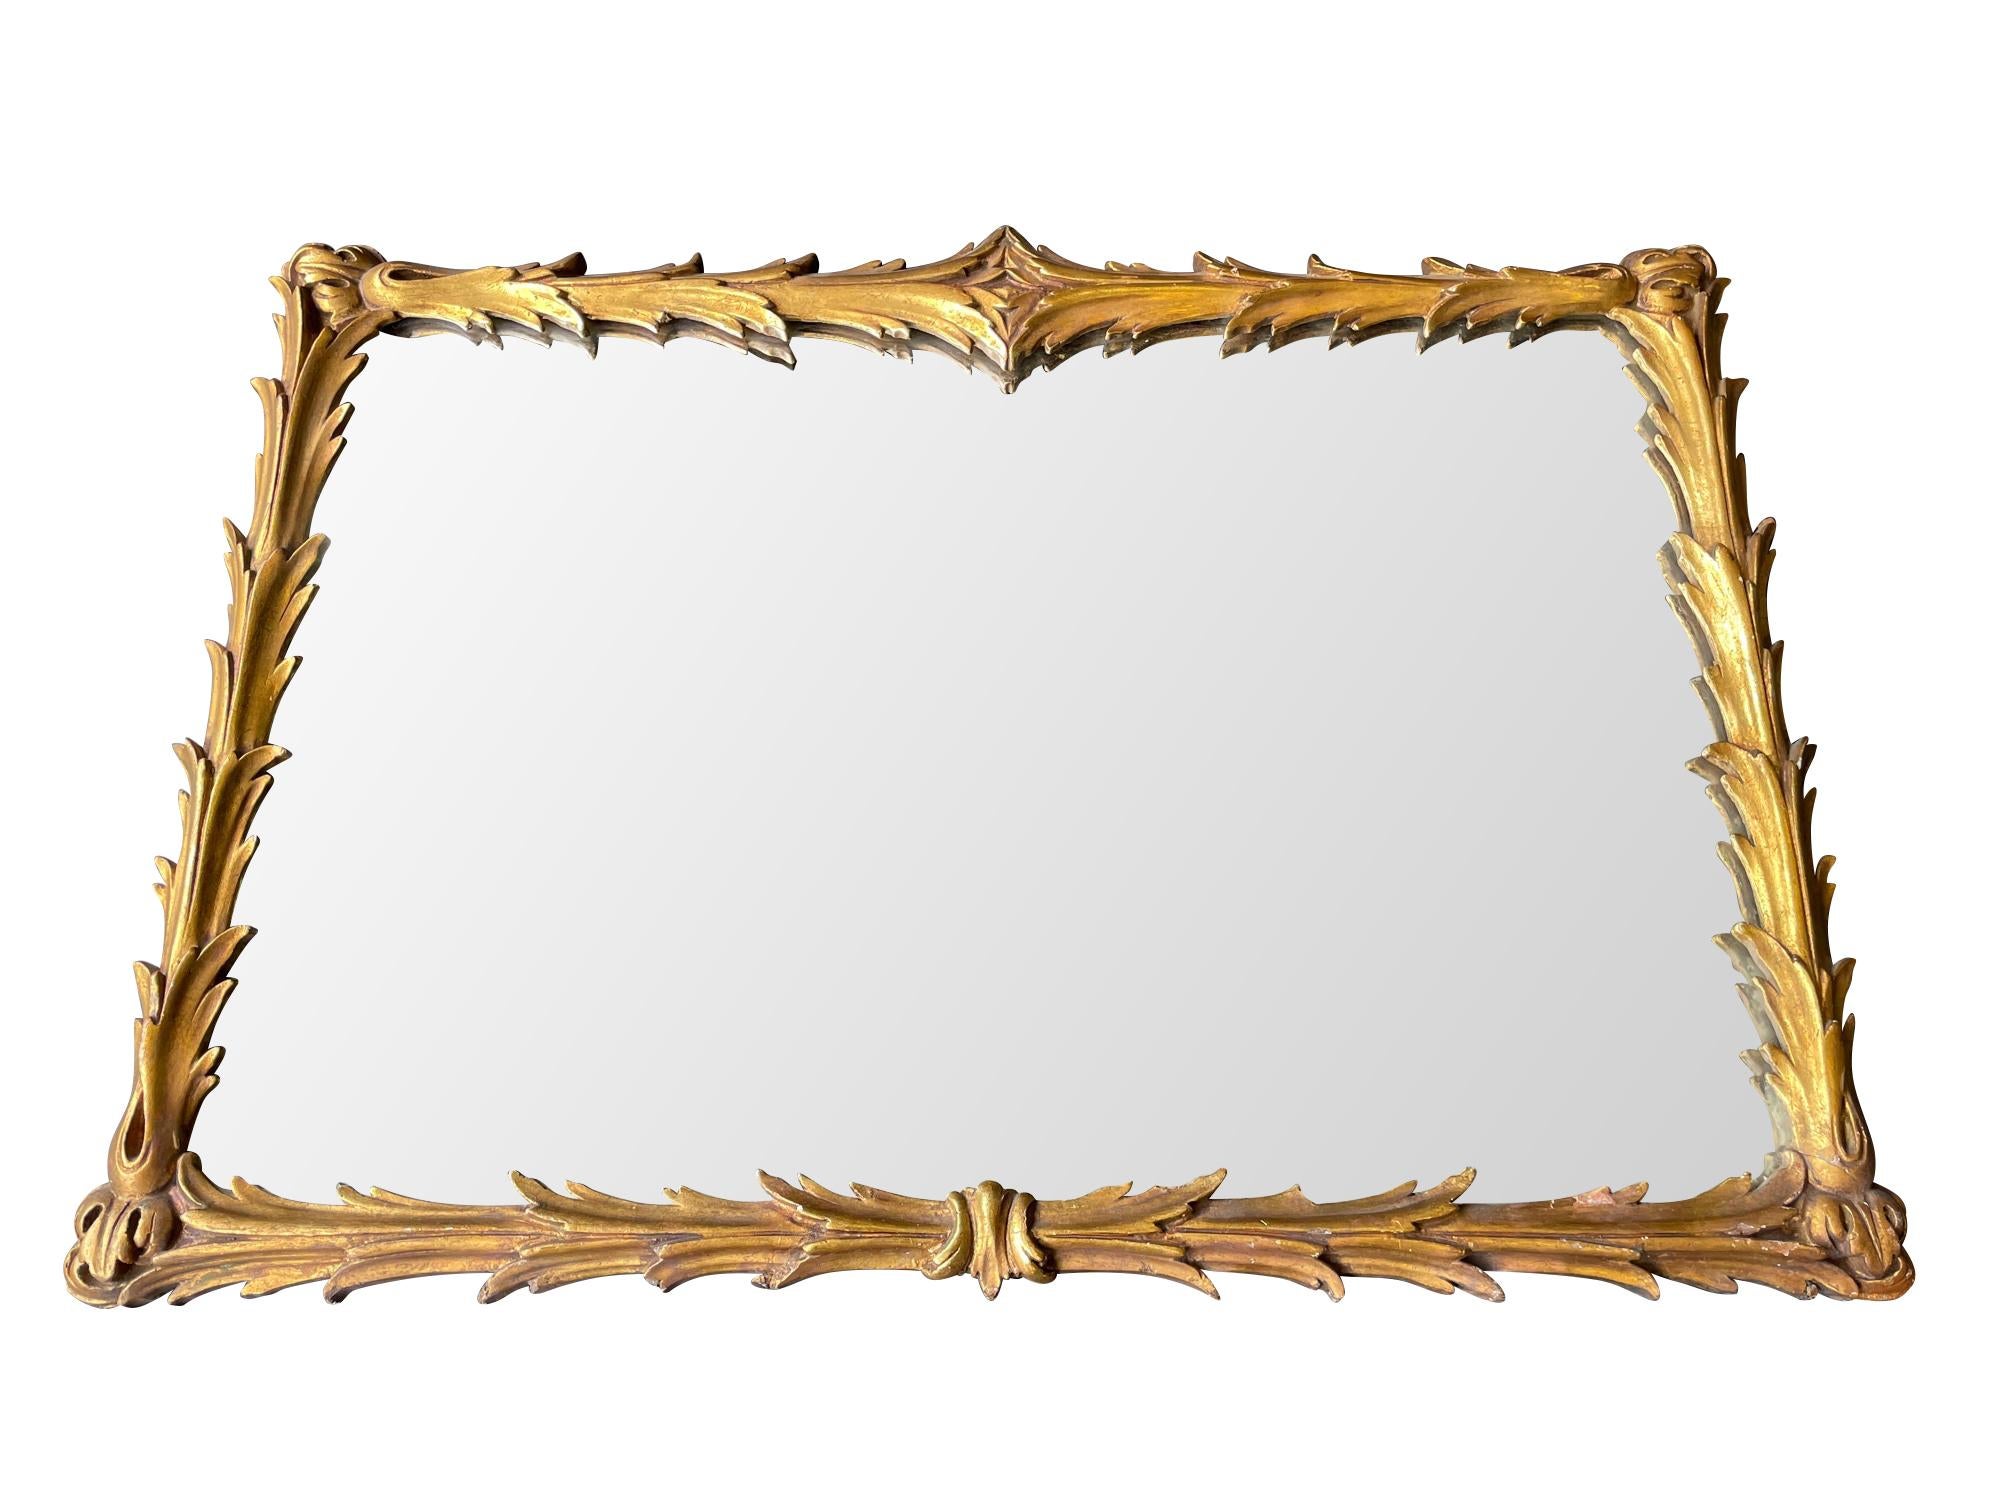 Mid-20th Century Lovely 1950s Italian Rectangular Rococo Style Gilt Gesso Acanthus Wall Mirror For Sale